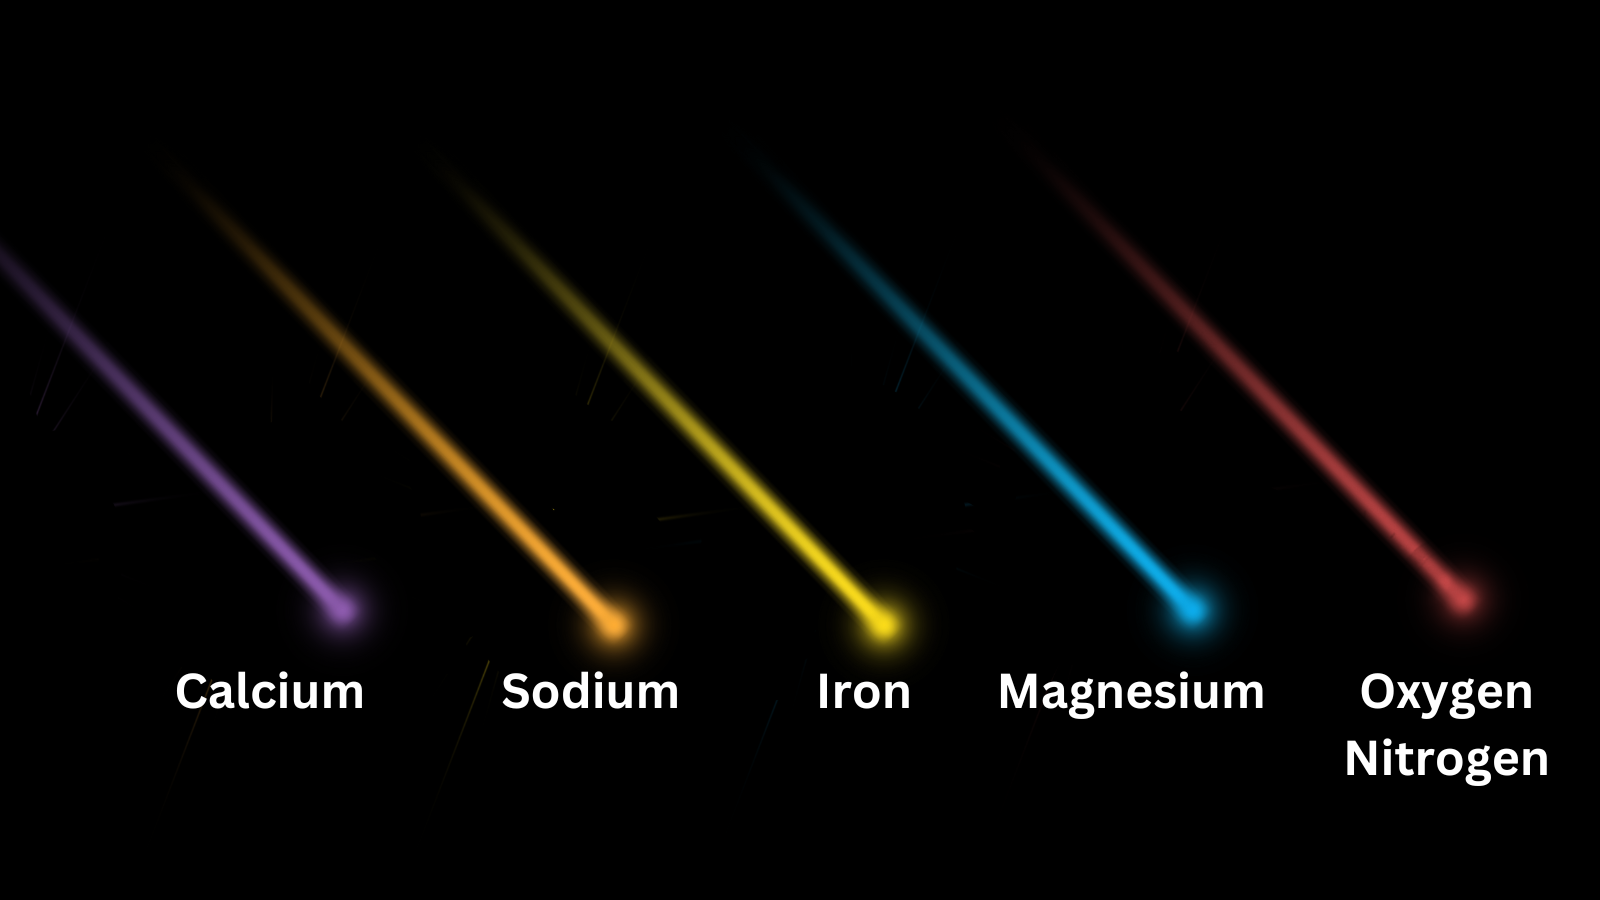 An illustration showing the different colors of fireballs and the chemical they indicate.